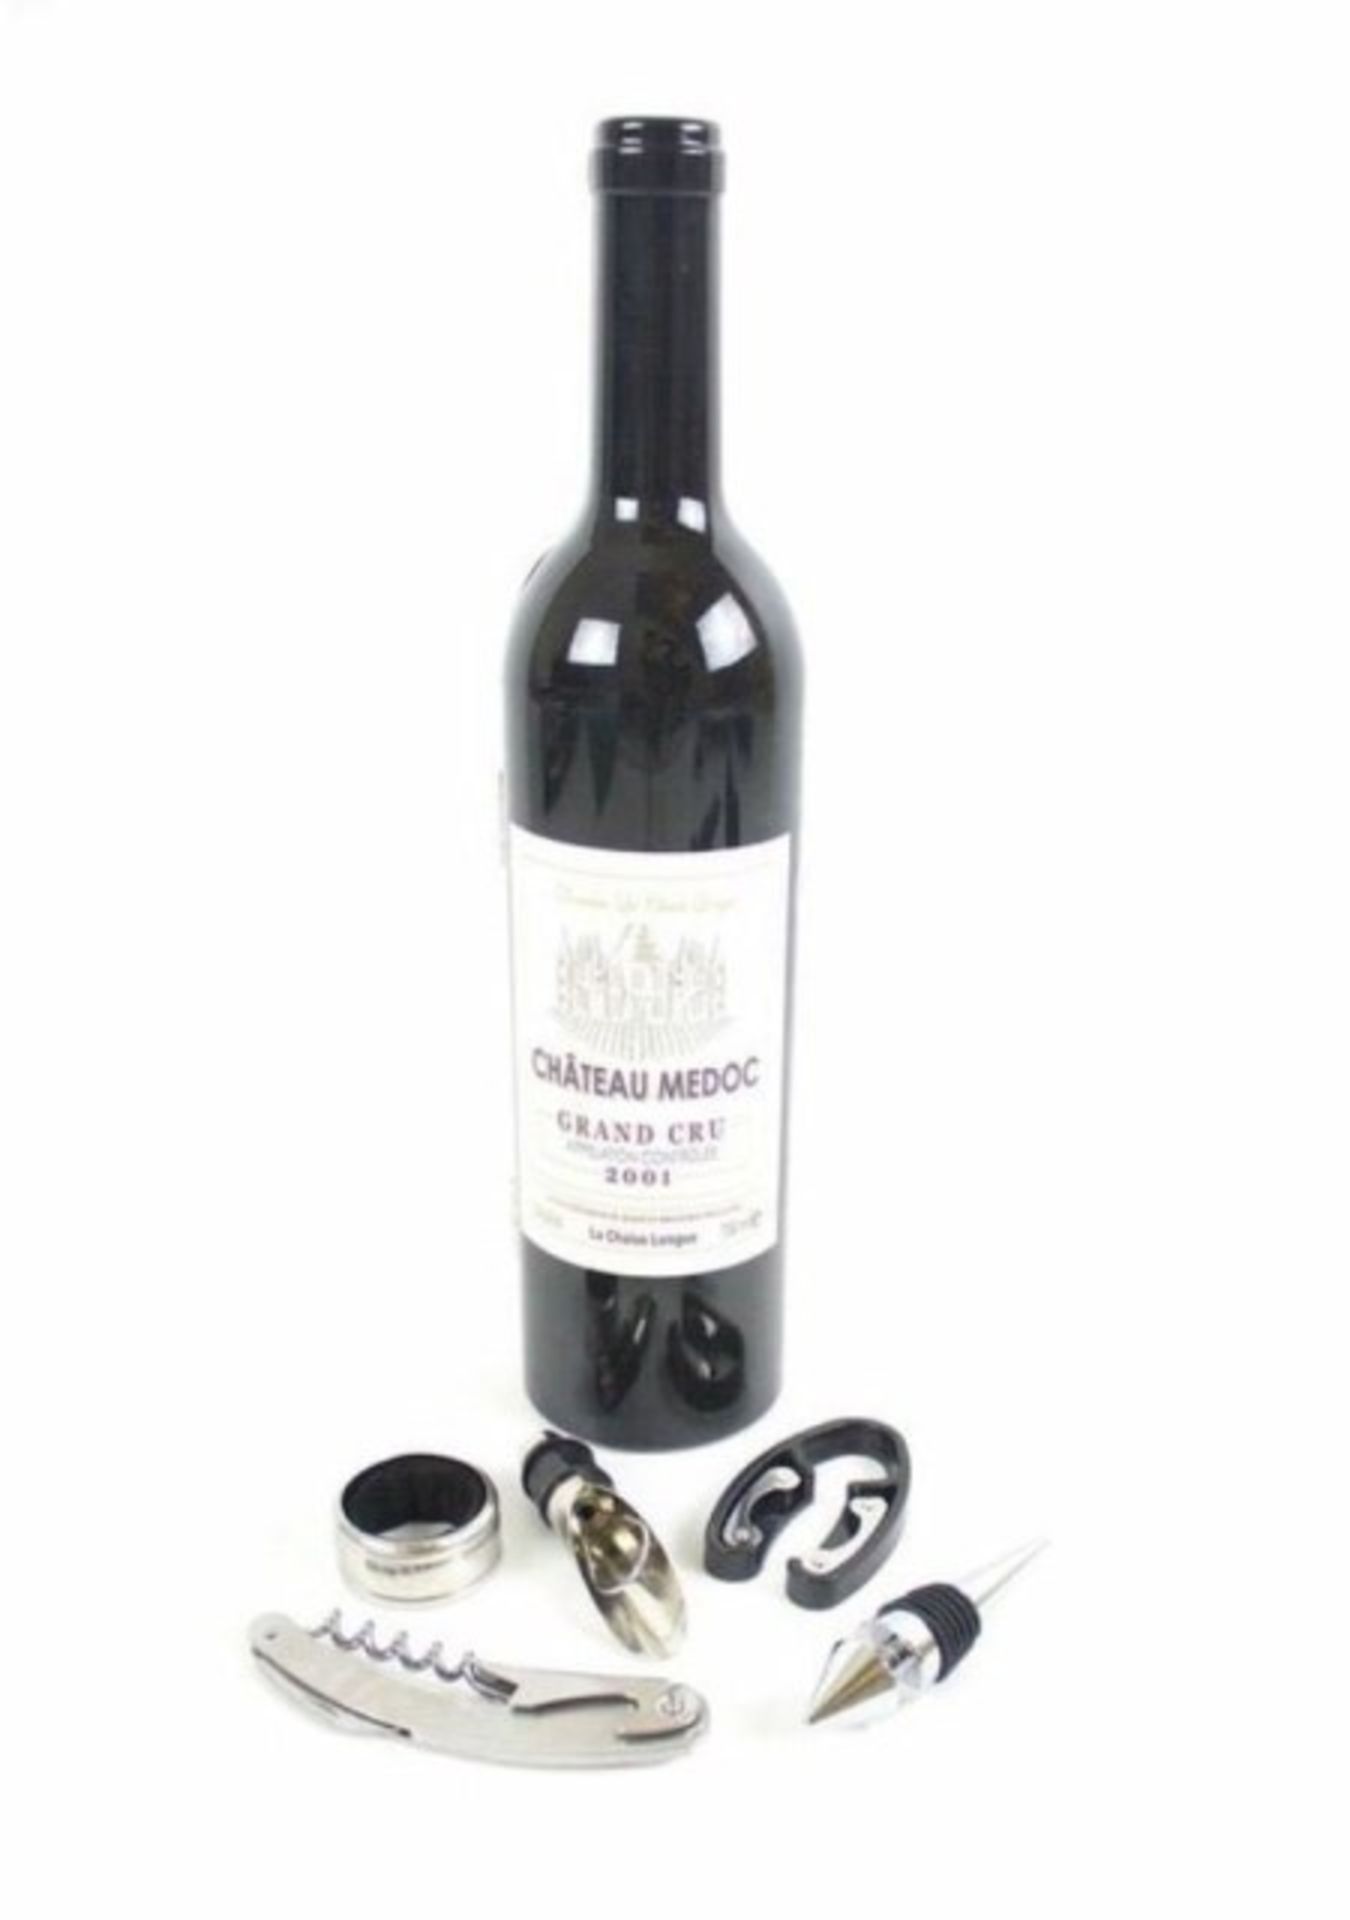 V *TRADE QTY* Brand New Boxed Wine Connoisseurs Gift Set X 4 YOUR BID PRICE TO BE MULTIPLIED BY